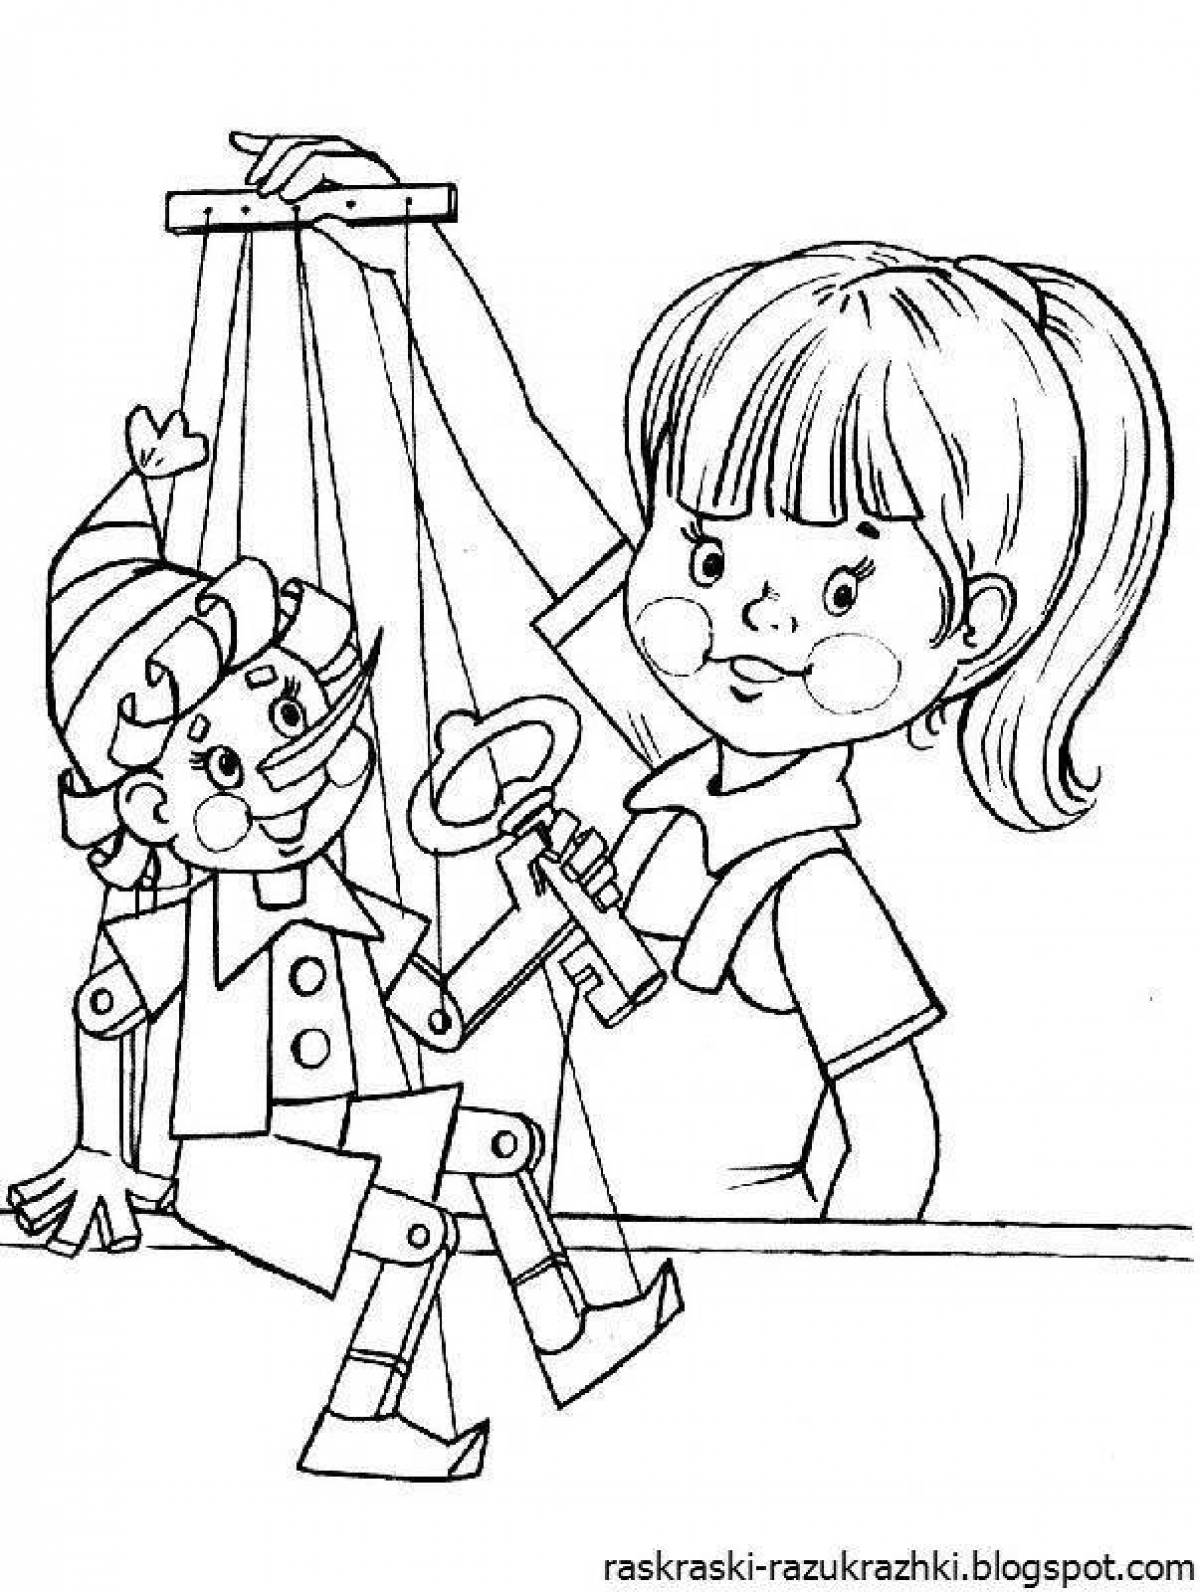 A fun theatrical coloring book for kids